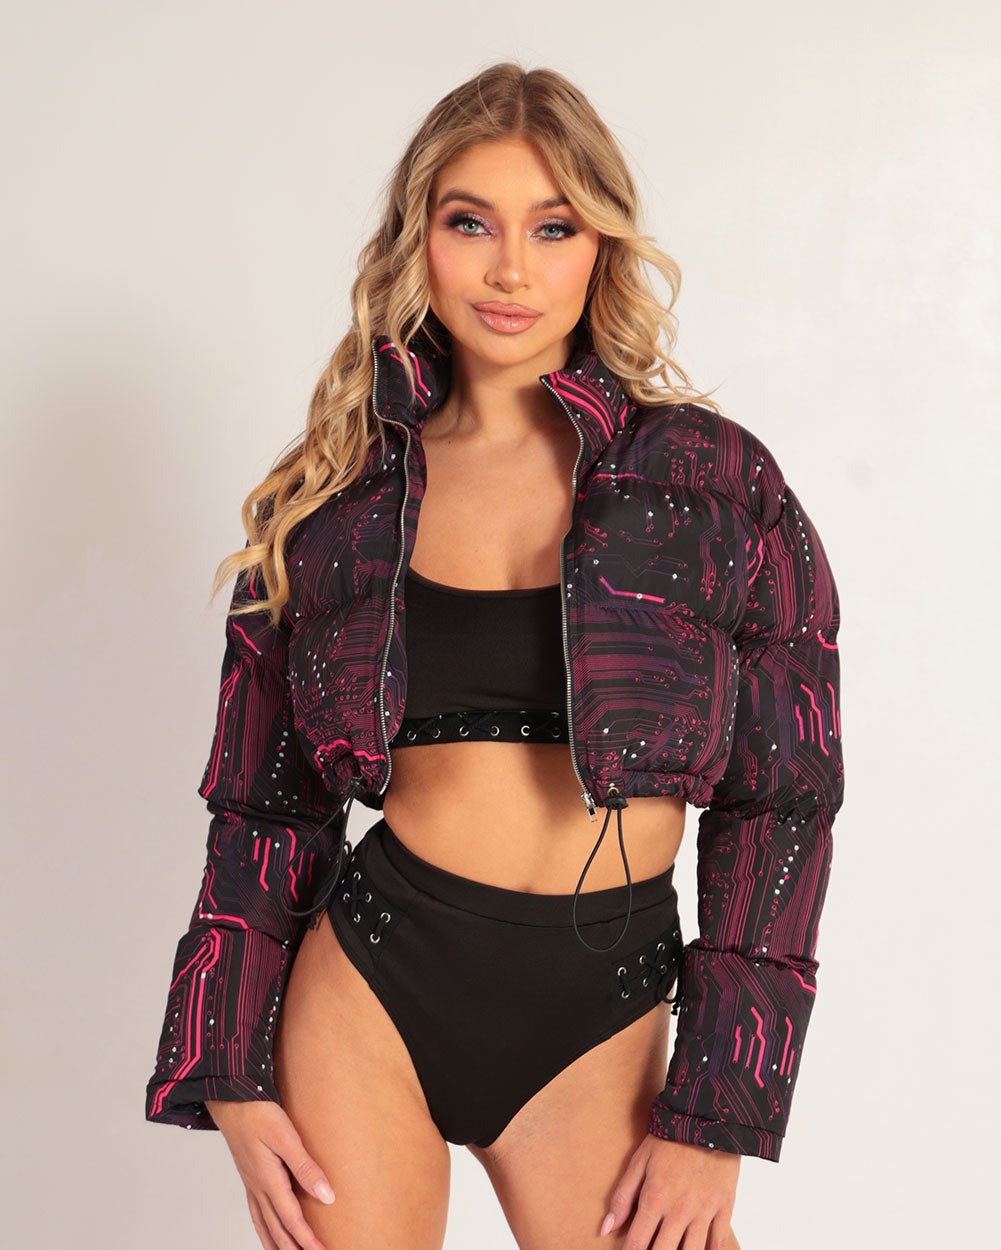 Cropped Puffer Jacket – Copping Zone